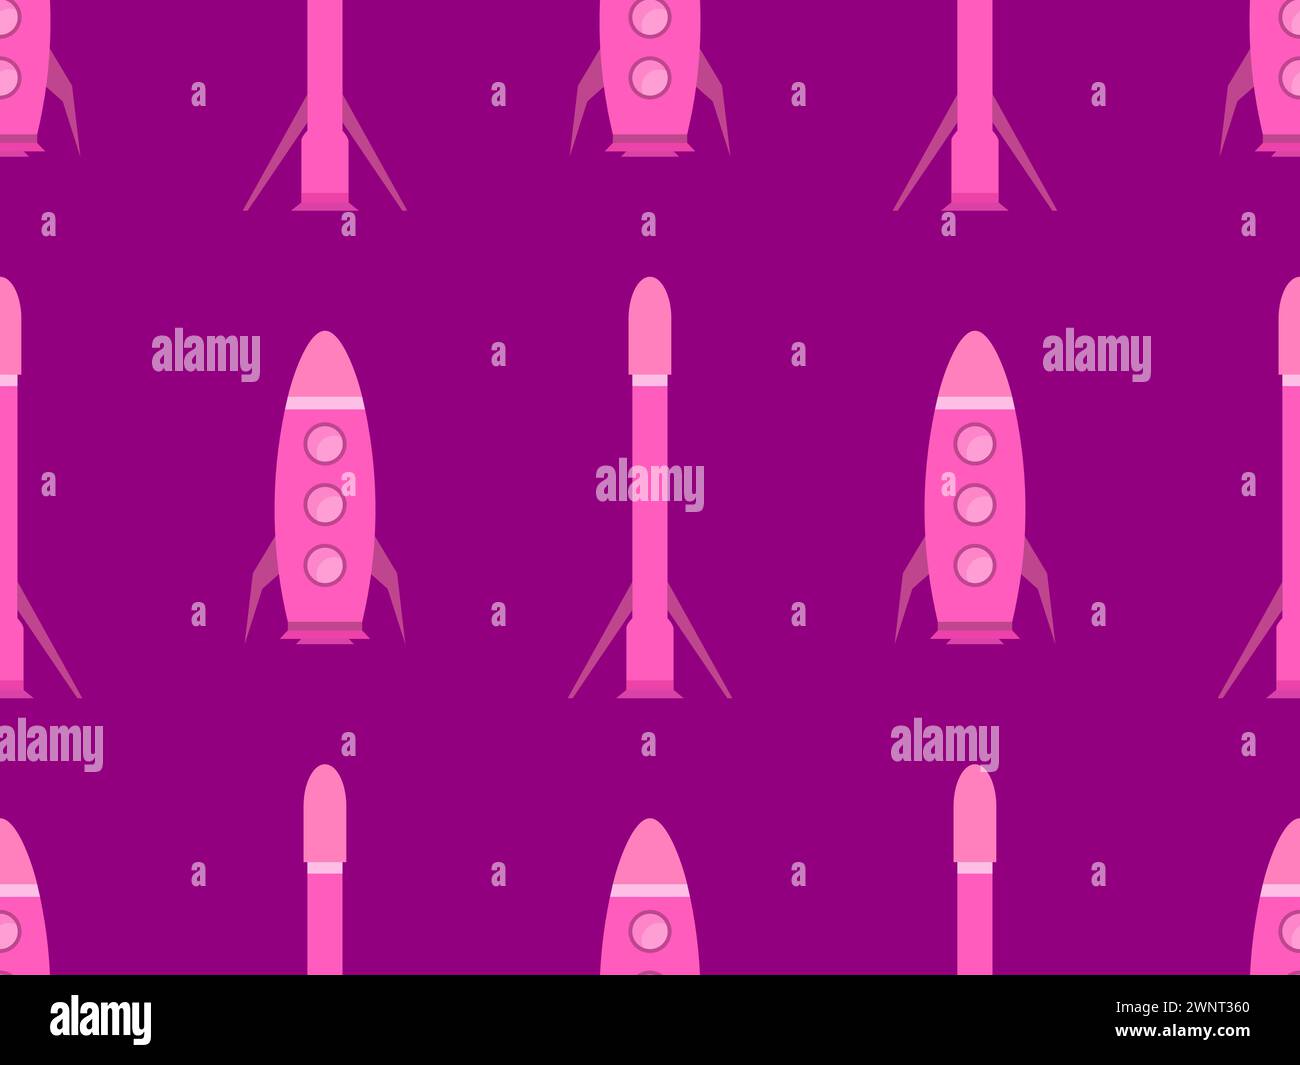 Spaceships seamless pattern. Orbital launch vehicle. Space rockets in flat style. Spaceships for space exploration and interplanetary flights. Design Stock Vector